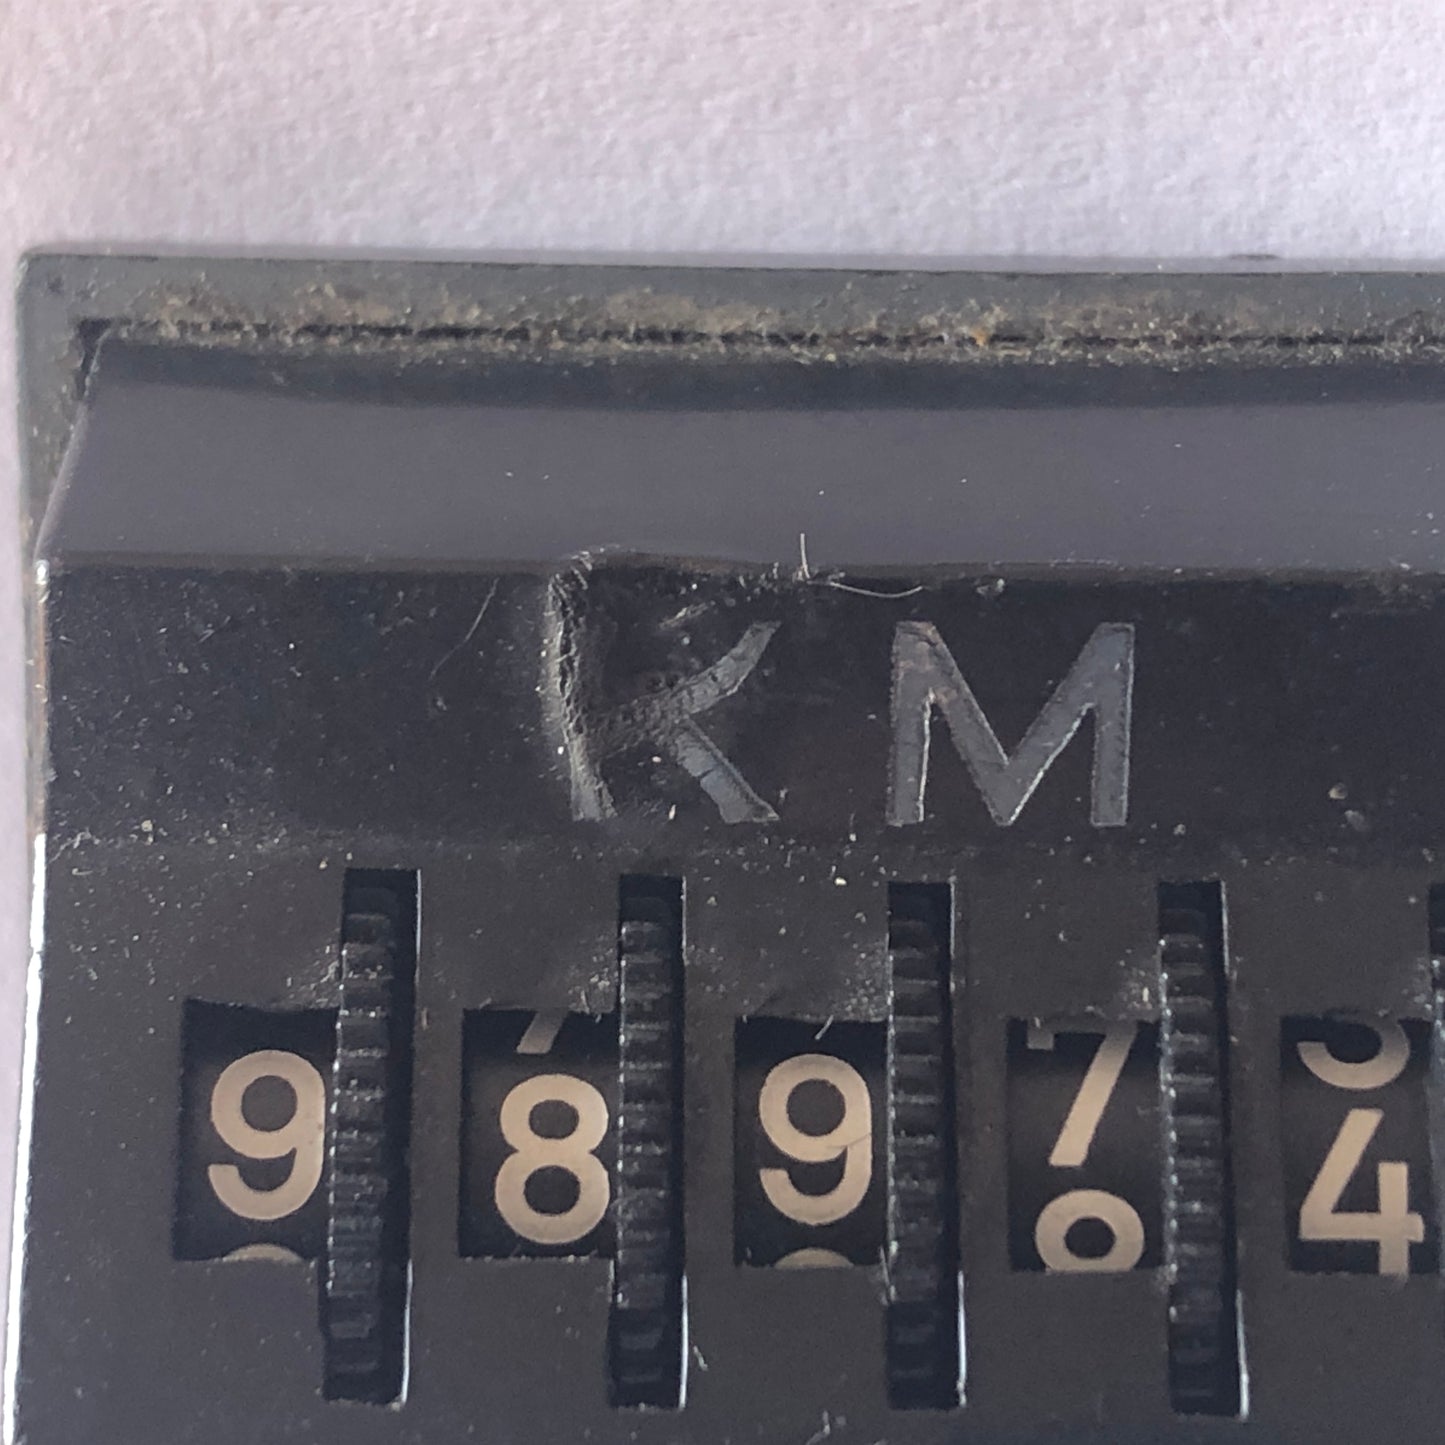 Automobilia, Vintage Manual Km Counter with Magnet